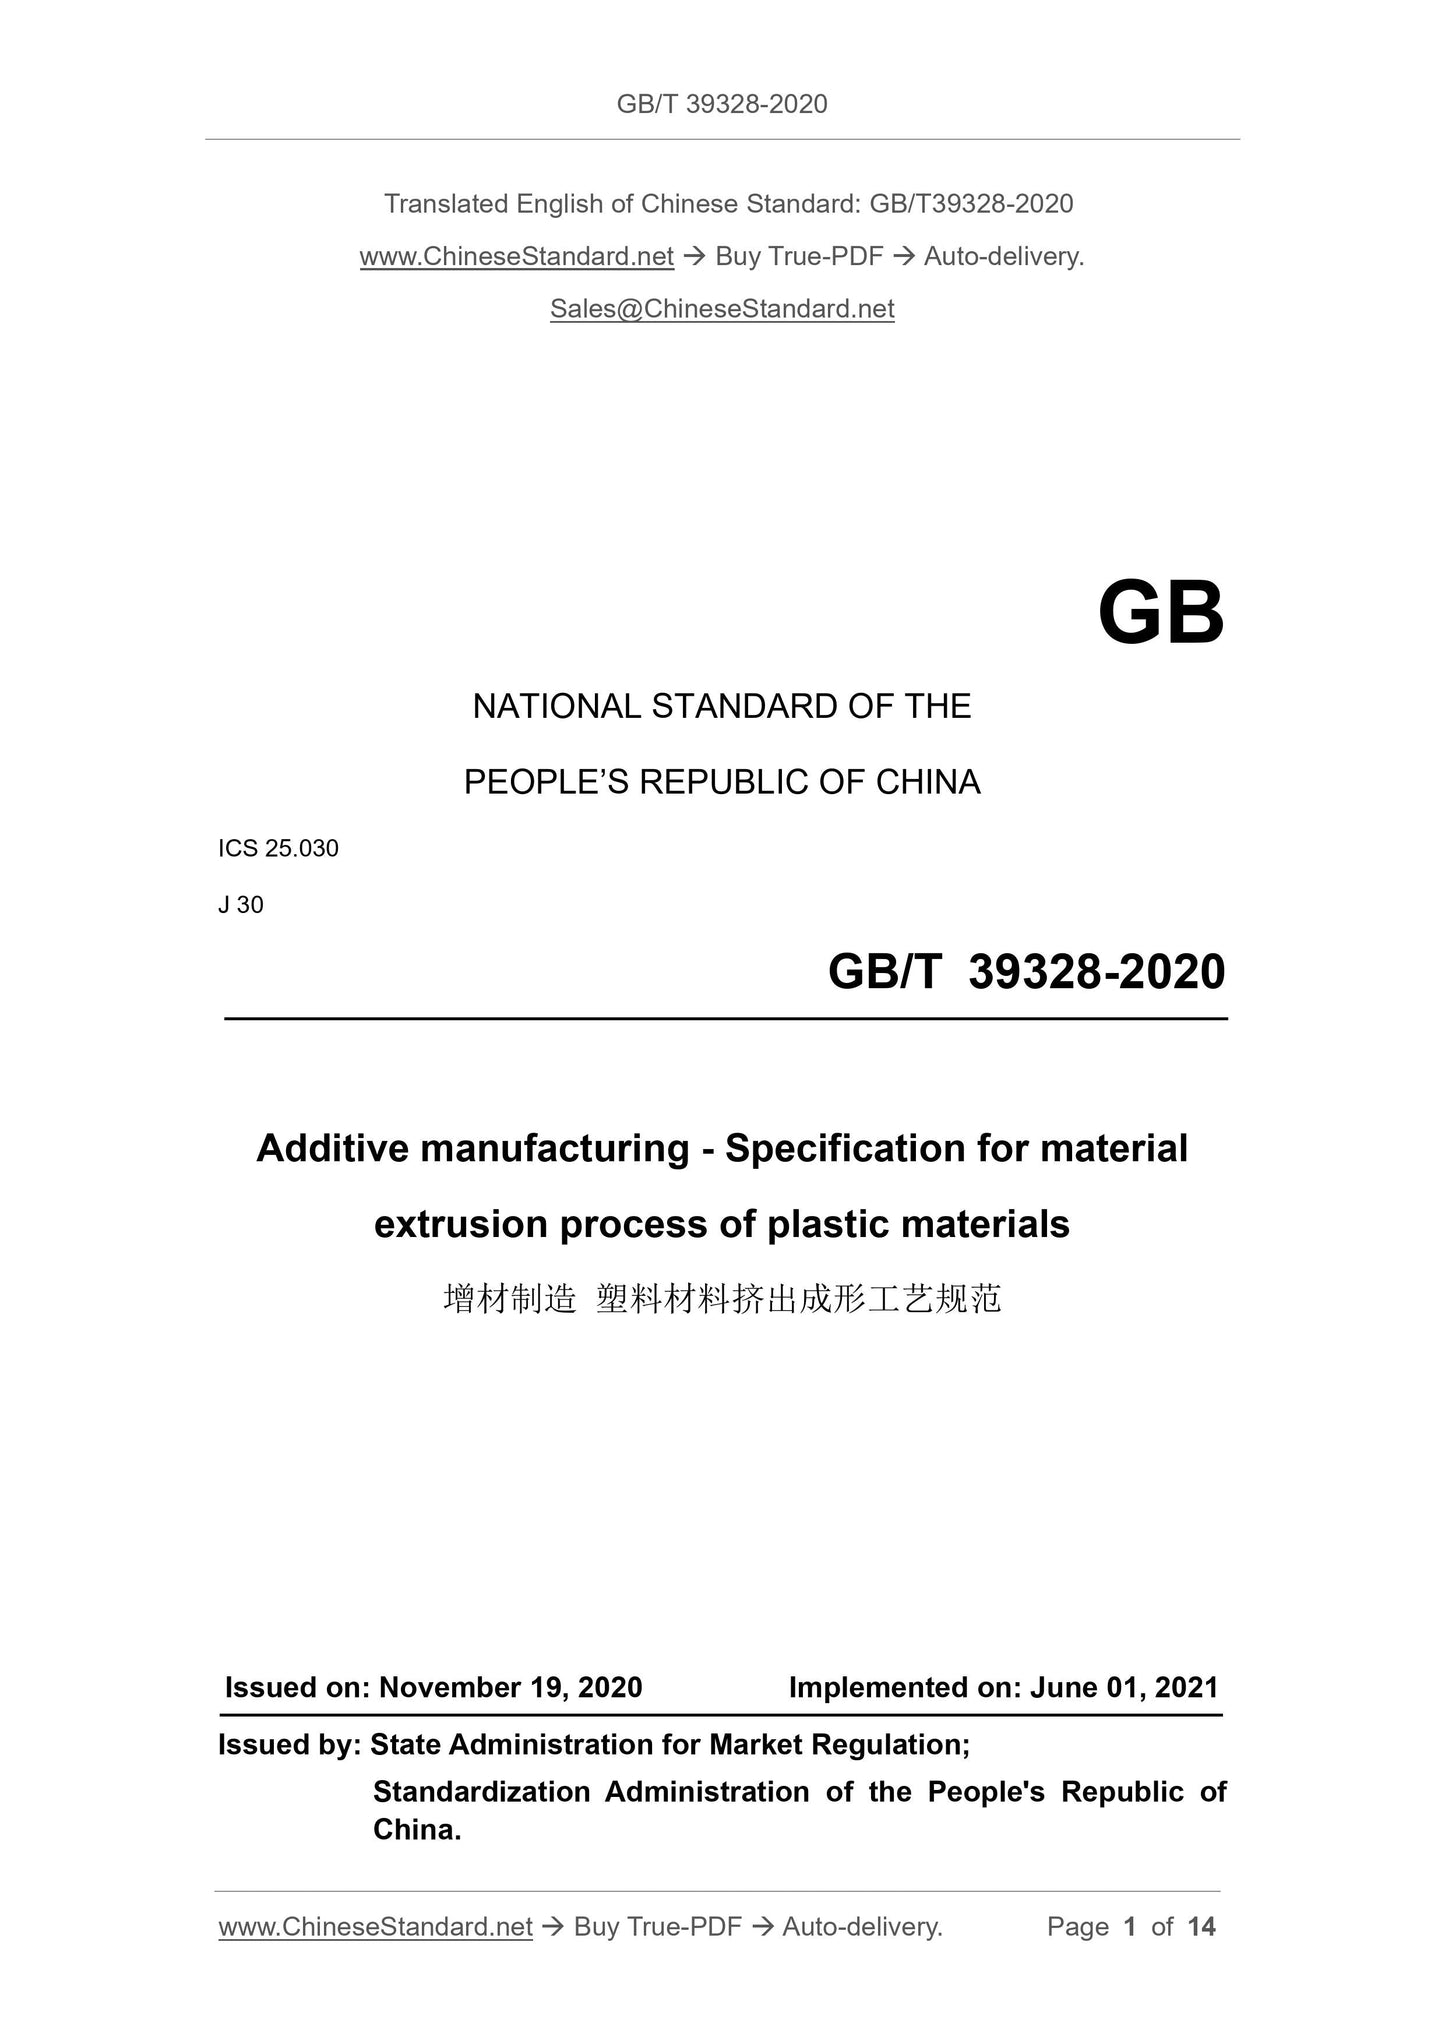 GB/T 39328-2020 Page 1